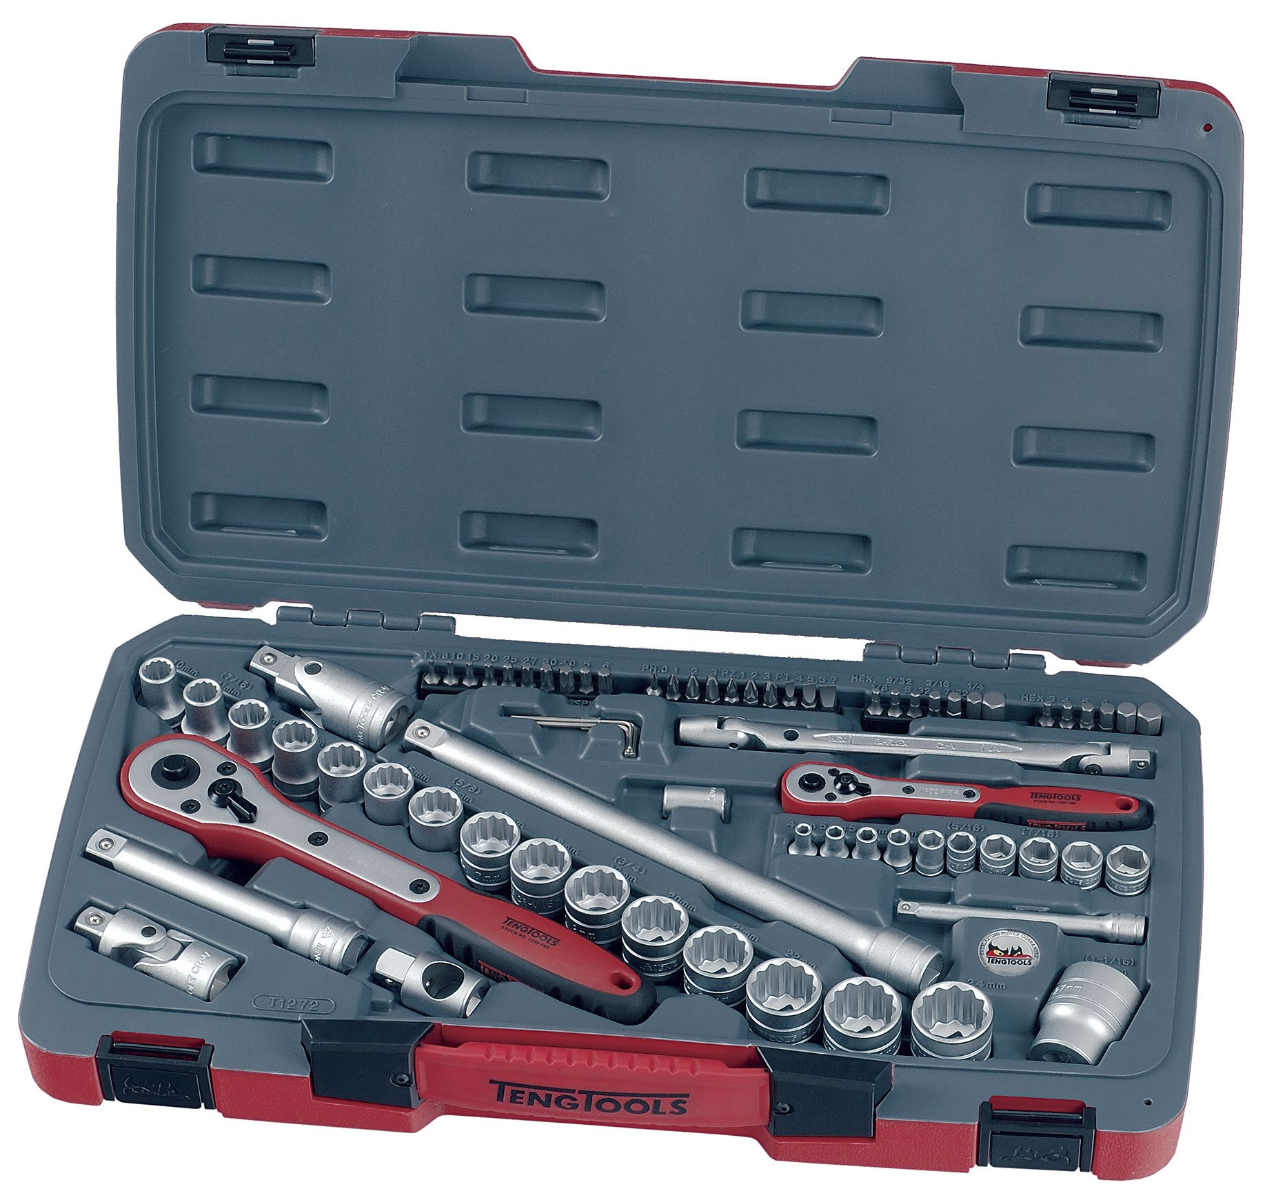 Teng Tools T1272 72 Piece 1/4" & 1/2" Drive 12 and 6 point Socket and bit Set in storage case